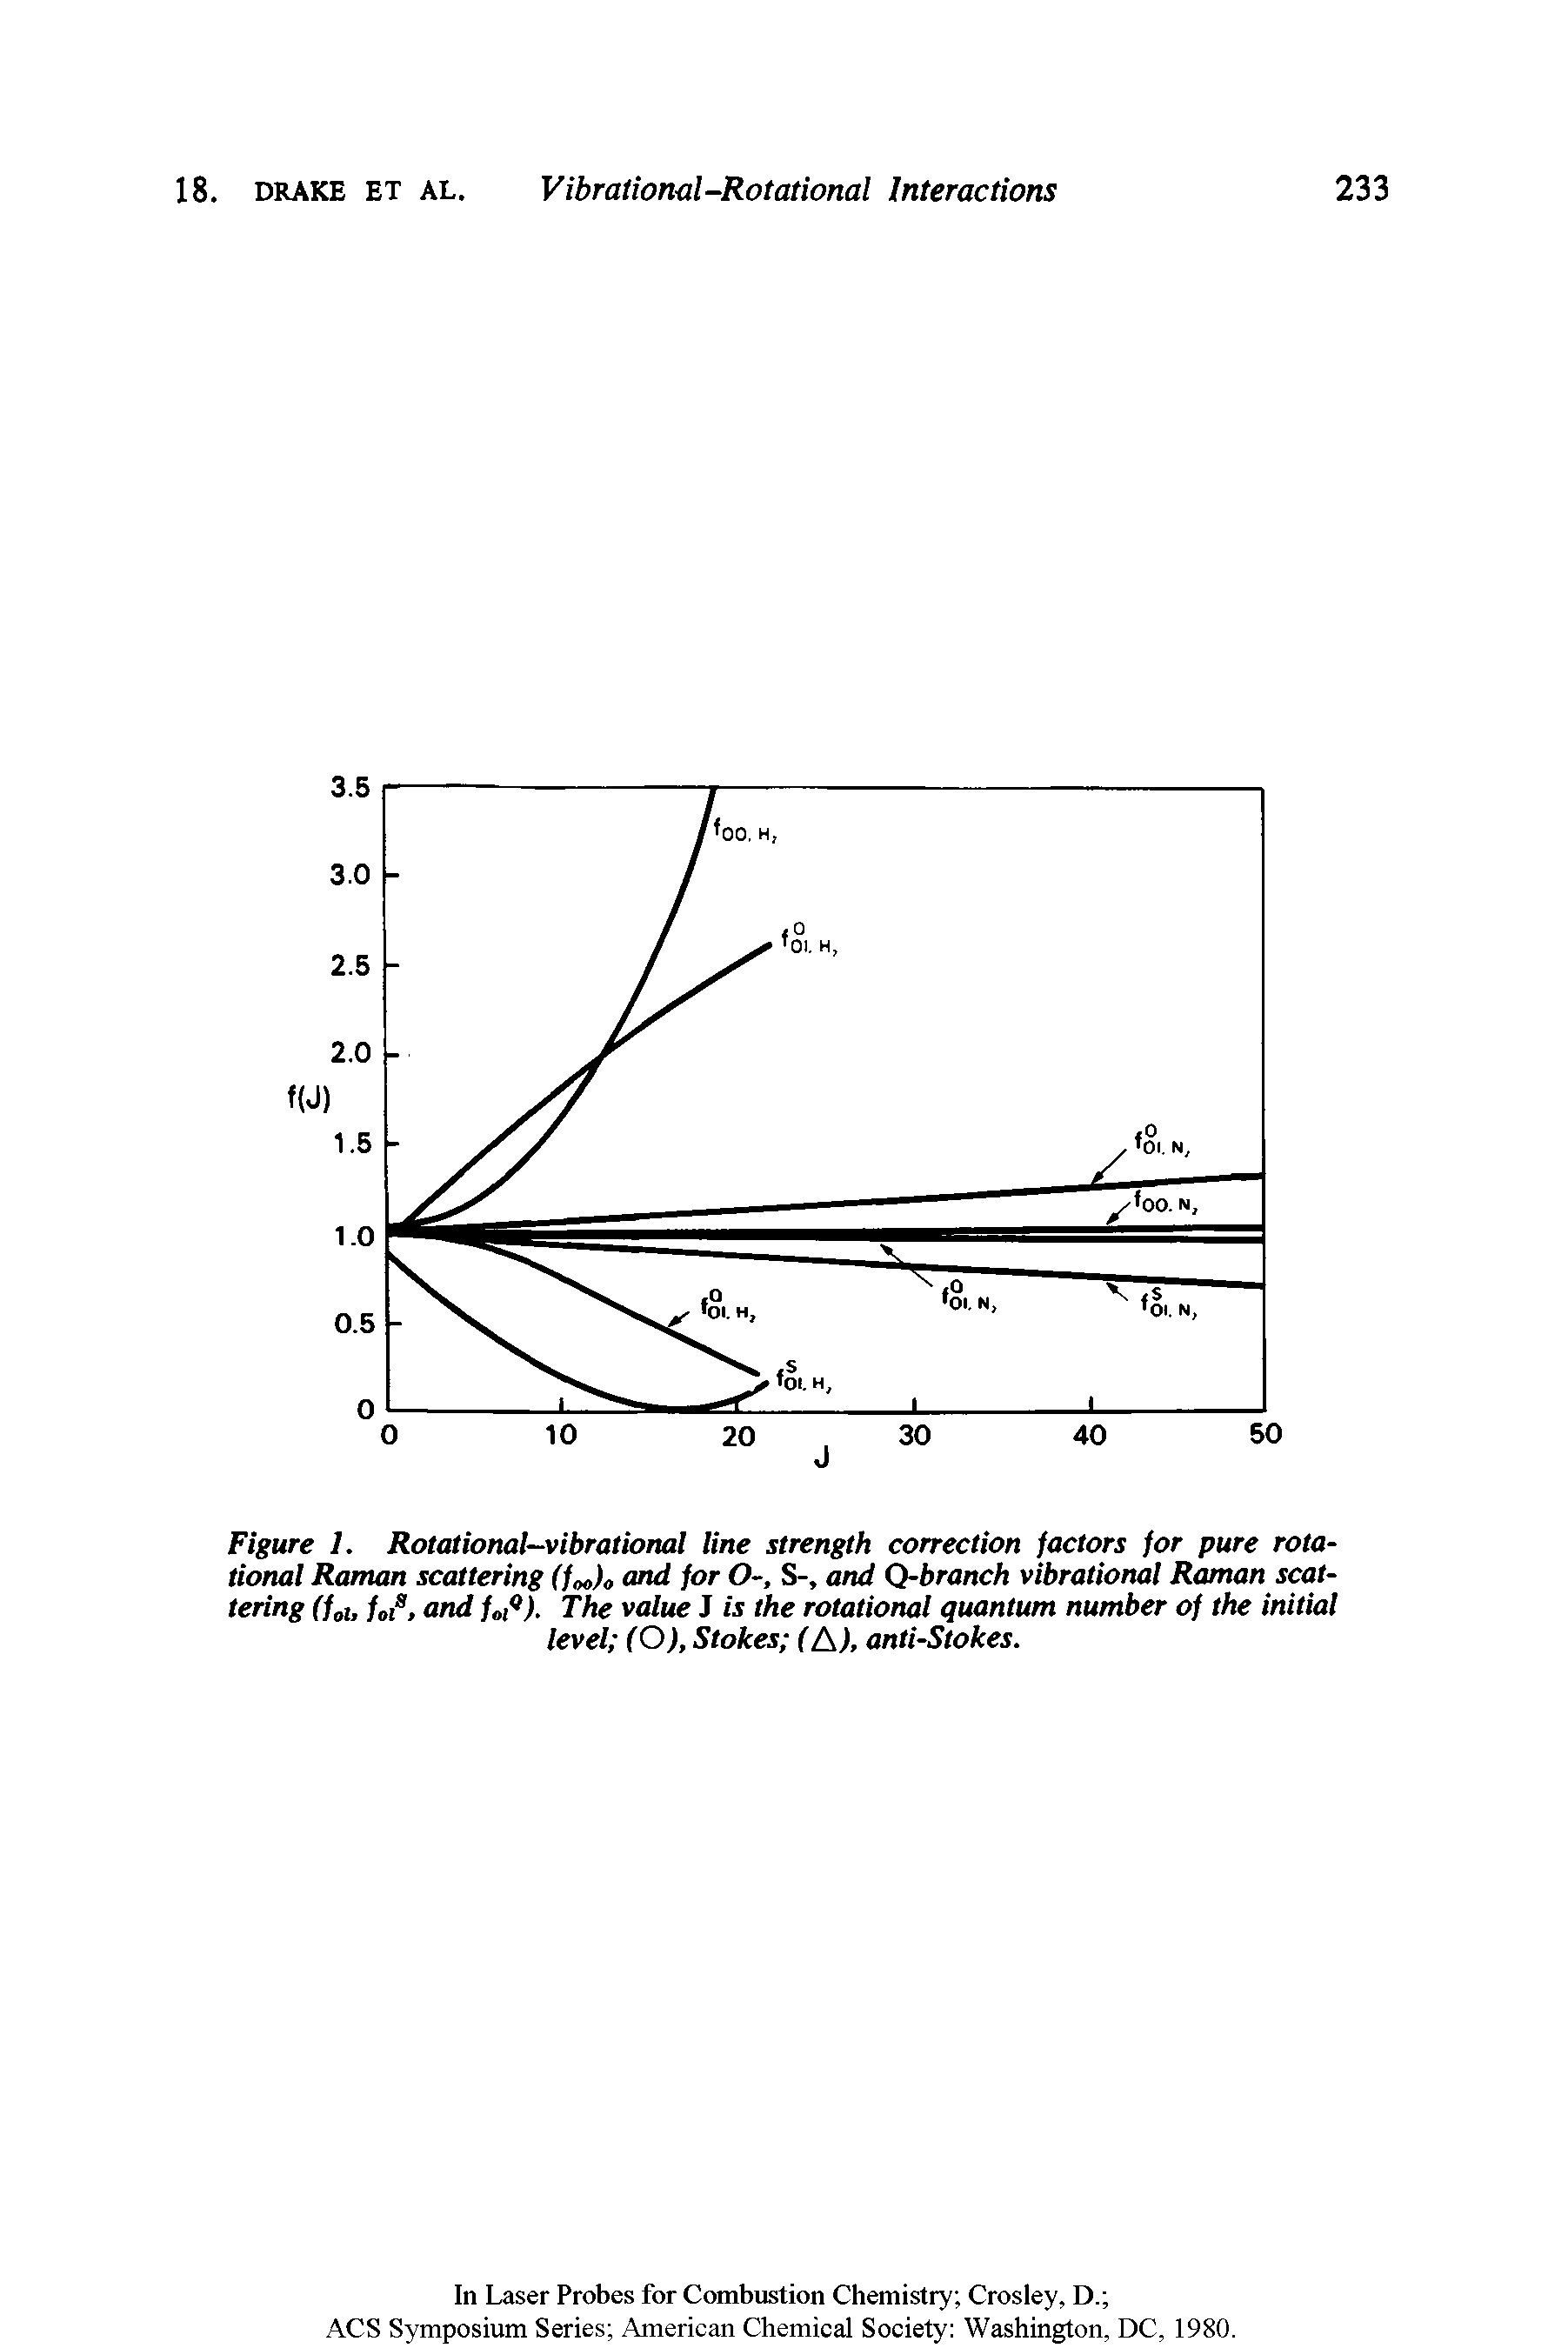 Figure 1. Rotational—vibrational line strength correction factors for pure rotational Raman scattering (fM)0 and for O-, S-, and Q-branch vibrational Raman scattering (foh fots, and folQ). The value J is the rotational quantum number of the initial level (O), Stokes (A), anti-Stokes.